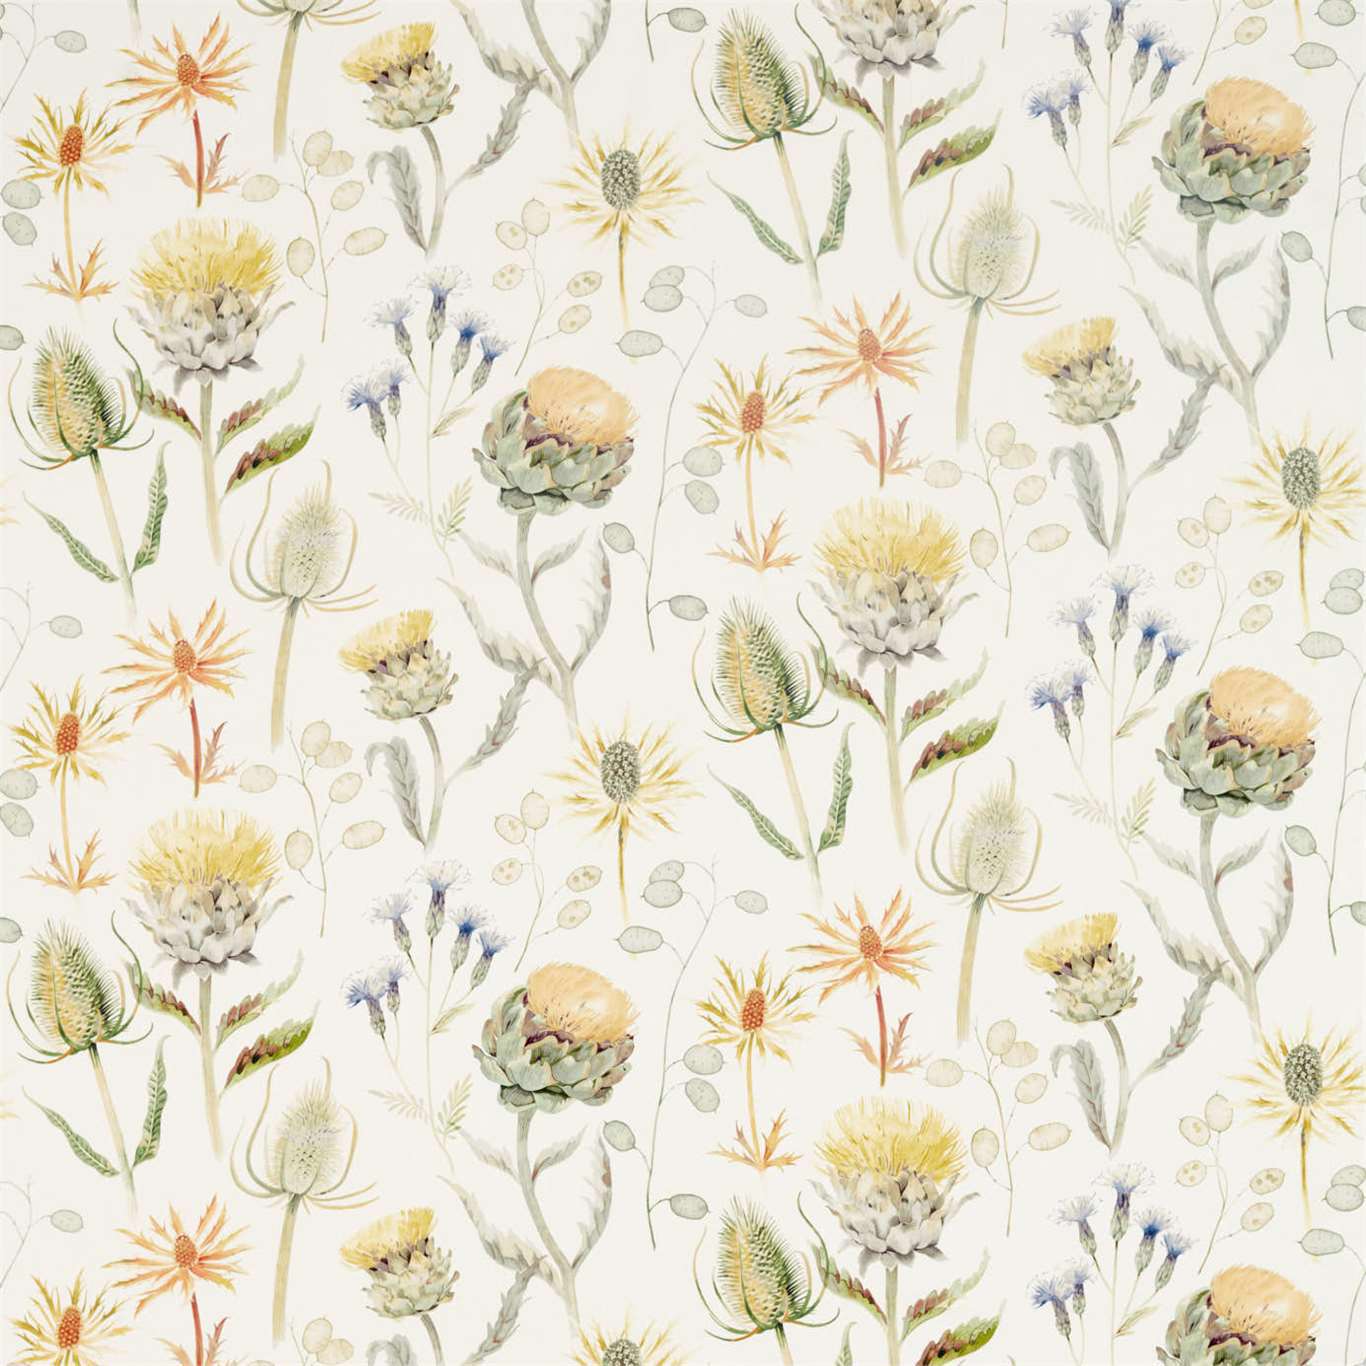 Thistle Garden Ochre/Olive Fabric by SAN